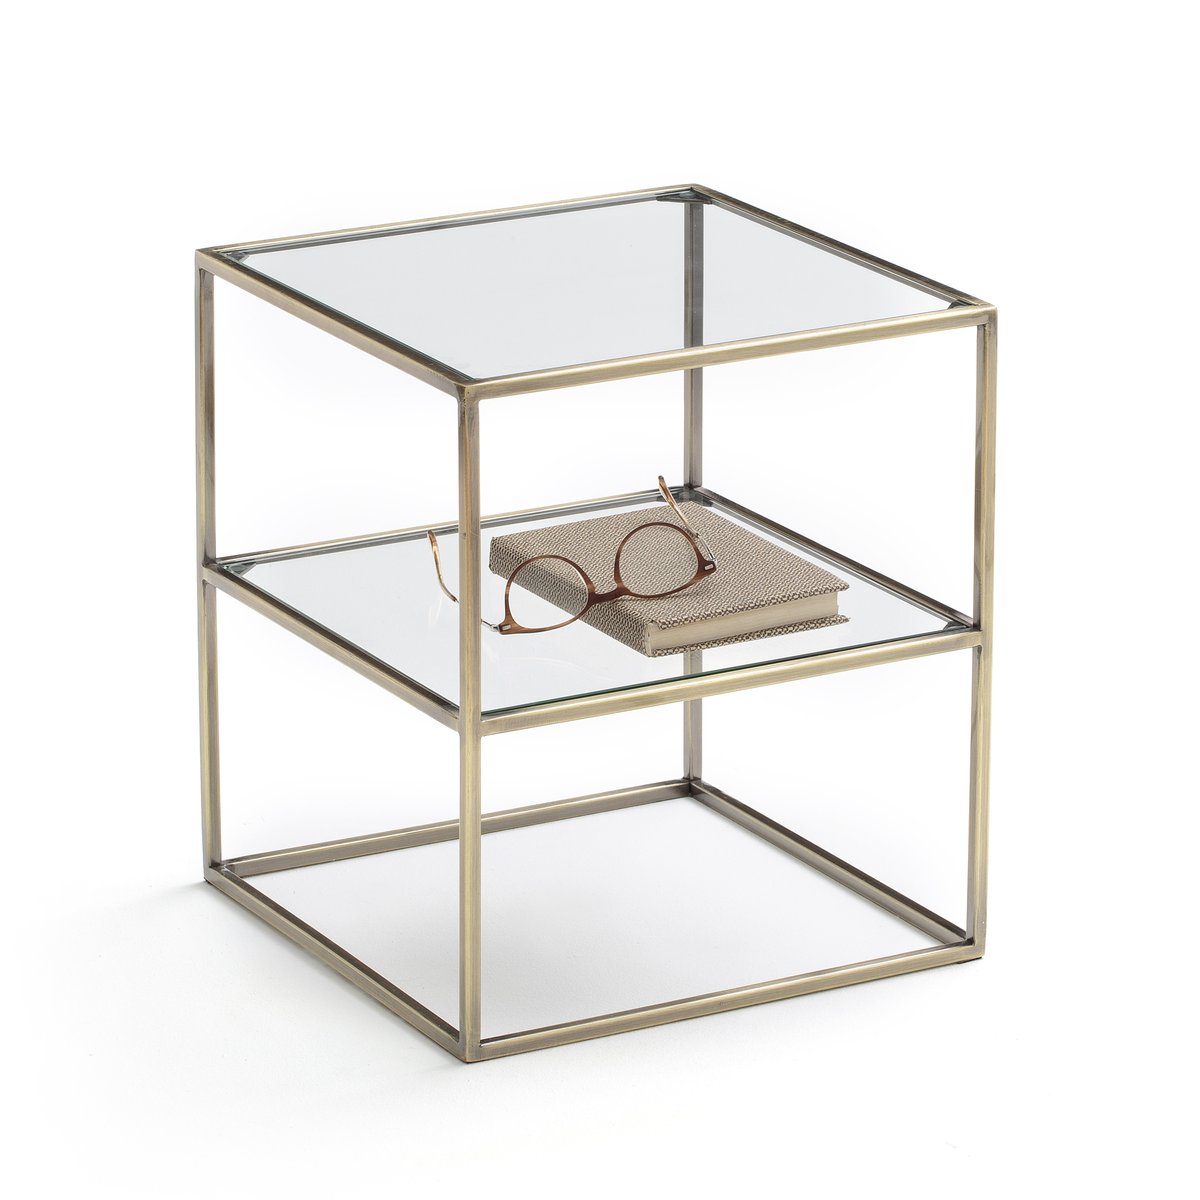 Image of LUXORE Double Shelf Bedside Table